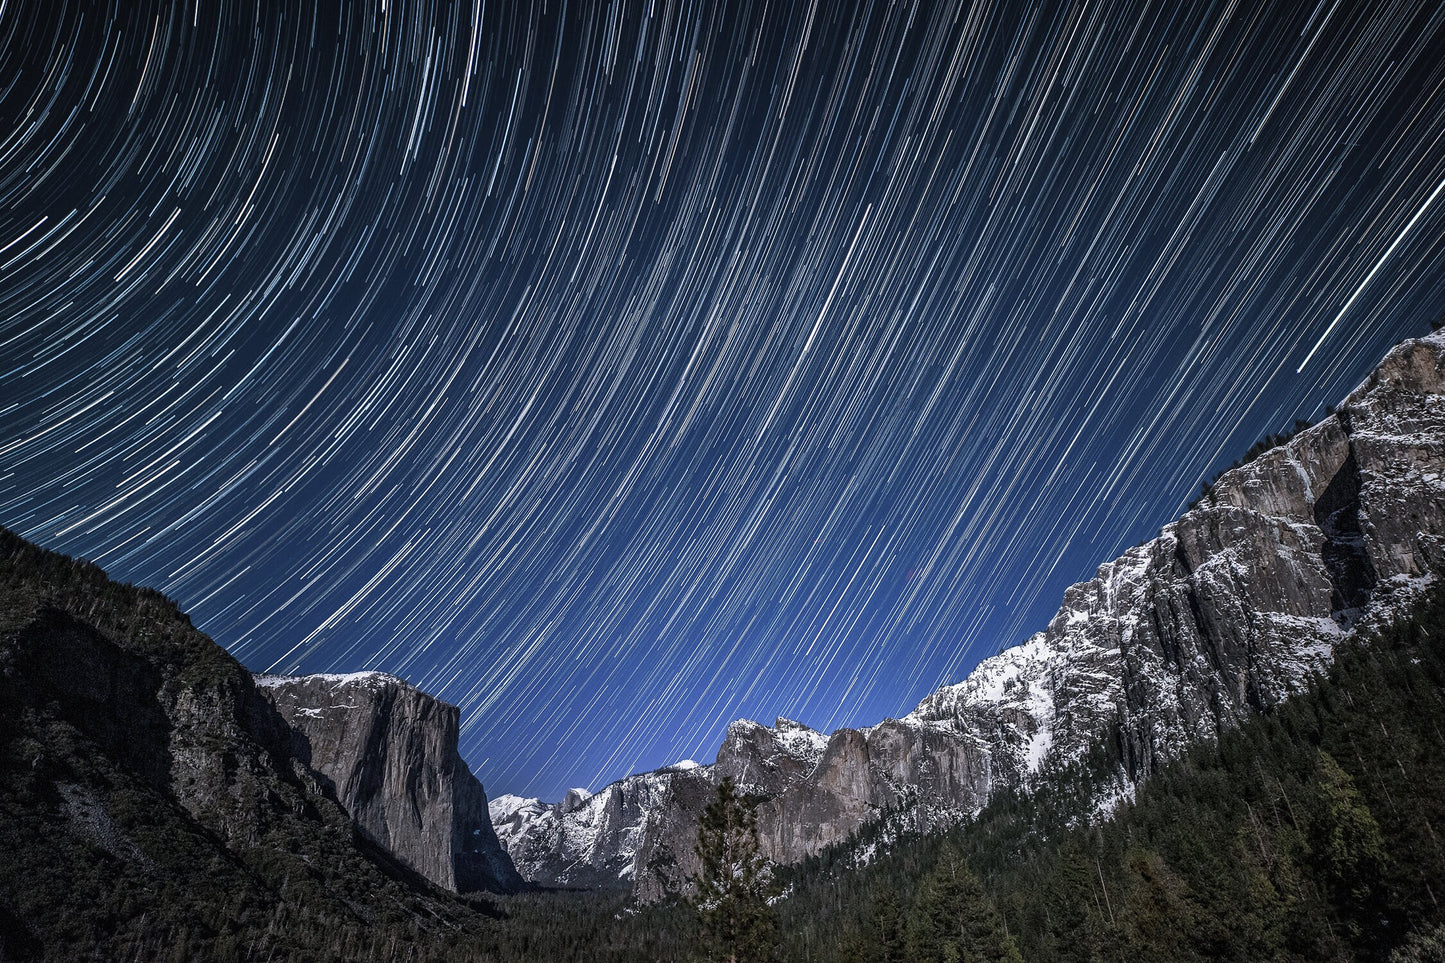 Tunnel View in Yosemite National Park - Star Trails, Night, Milky Way, Nature Photography Prints, Adventure Print, Landscape Wall Art